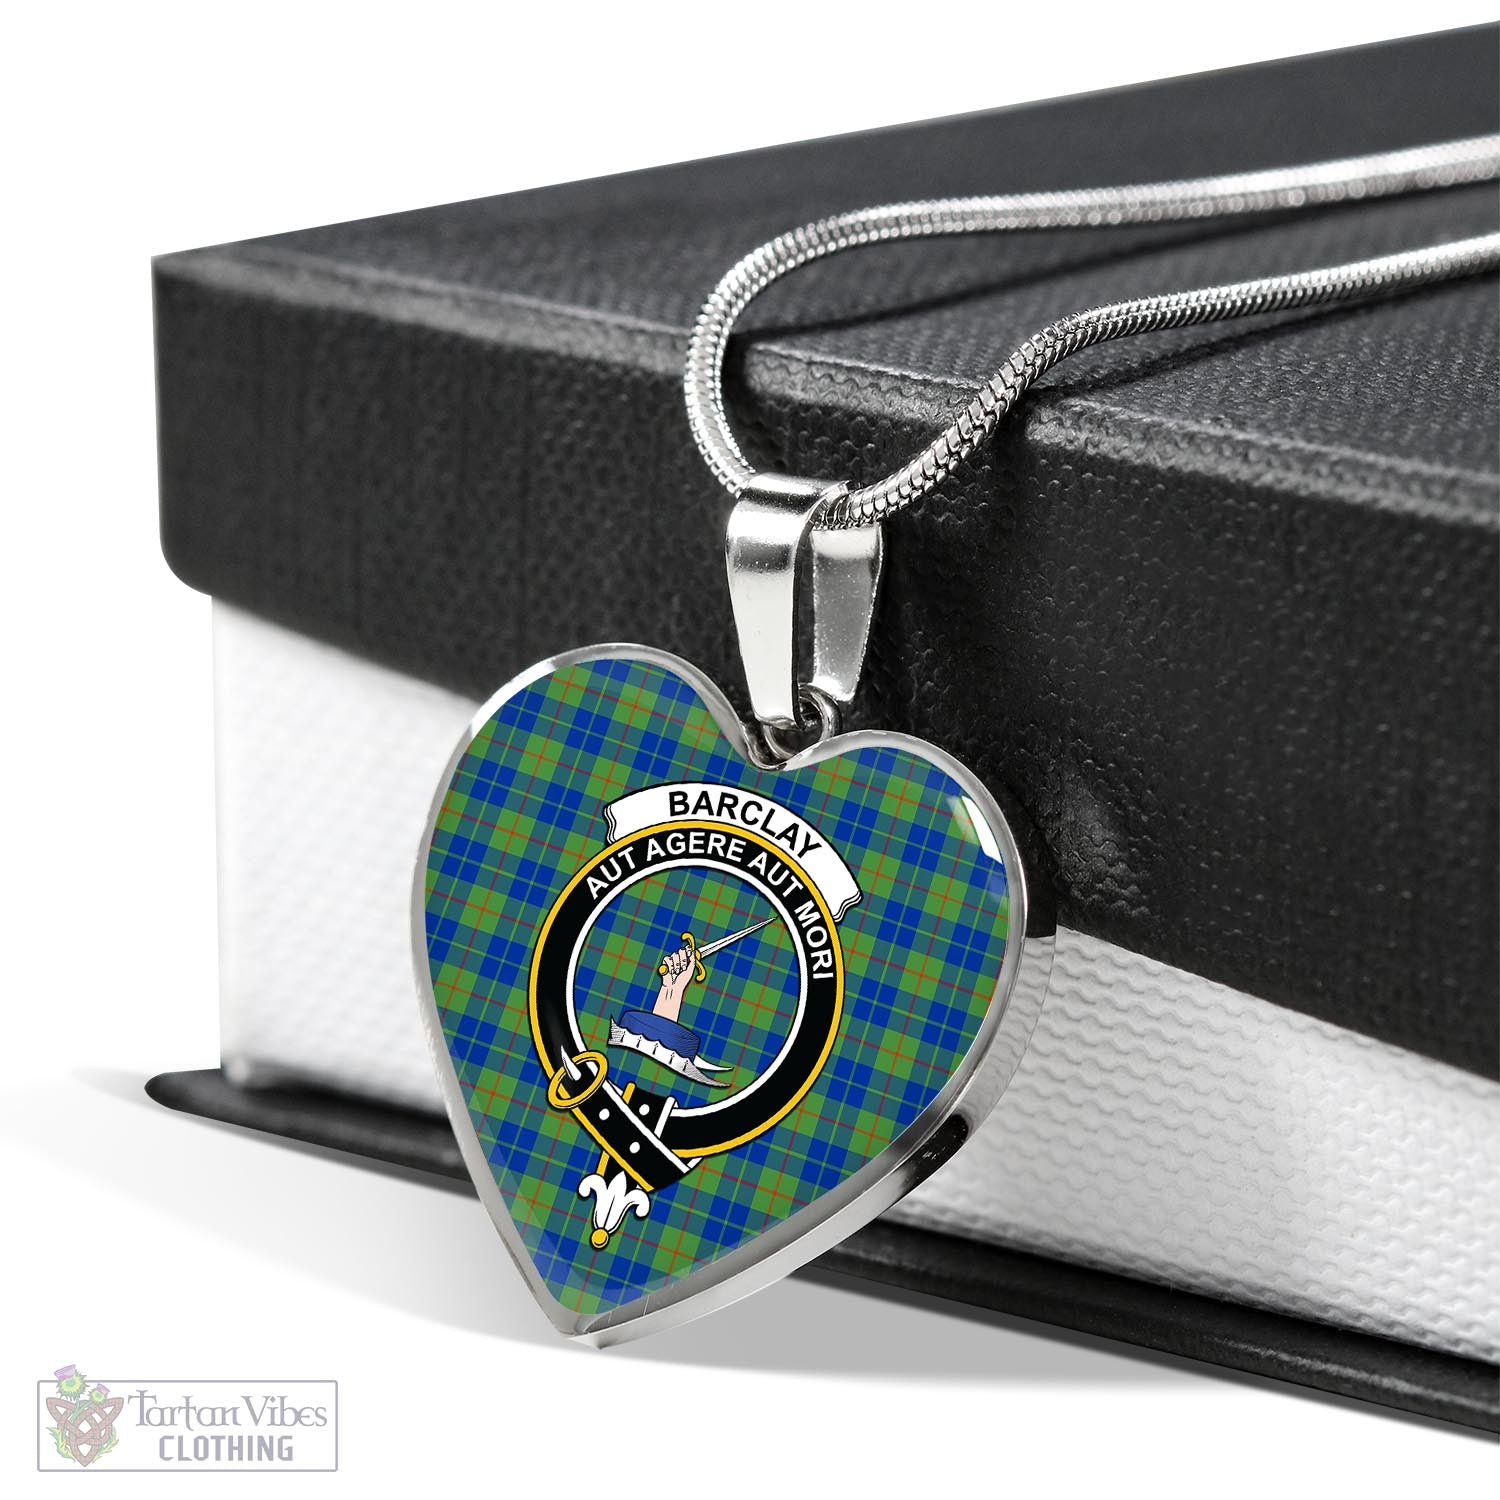 Tartan Vibes Clothing Barclay Hunting Ancient Tartan Heart Necklace with Family Crest